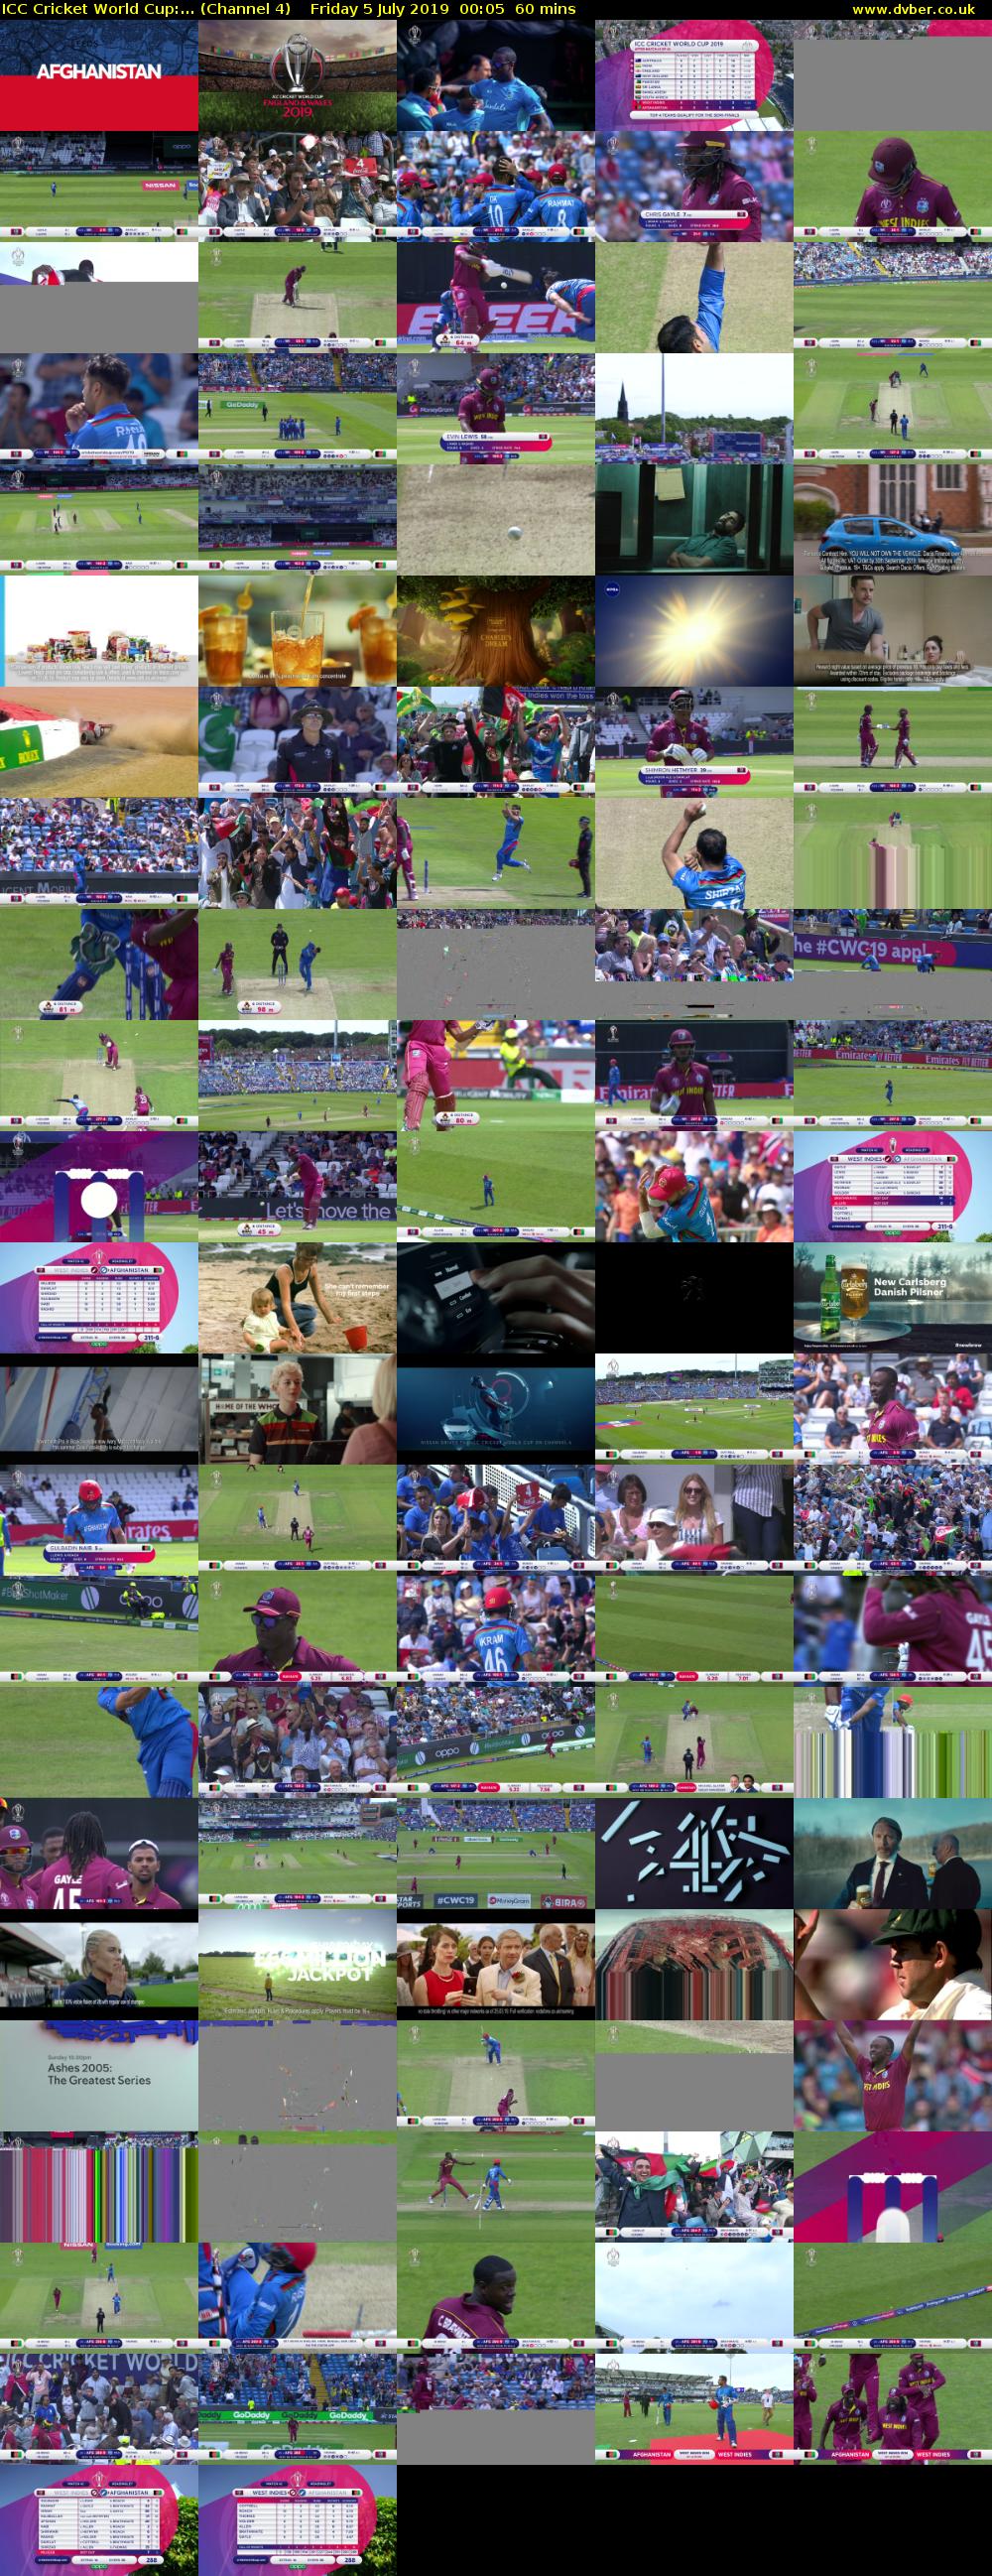 ICC Cricket World Cup:... (Channel 4) Friday 5 July 2019 00:05 - 01:05